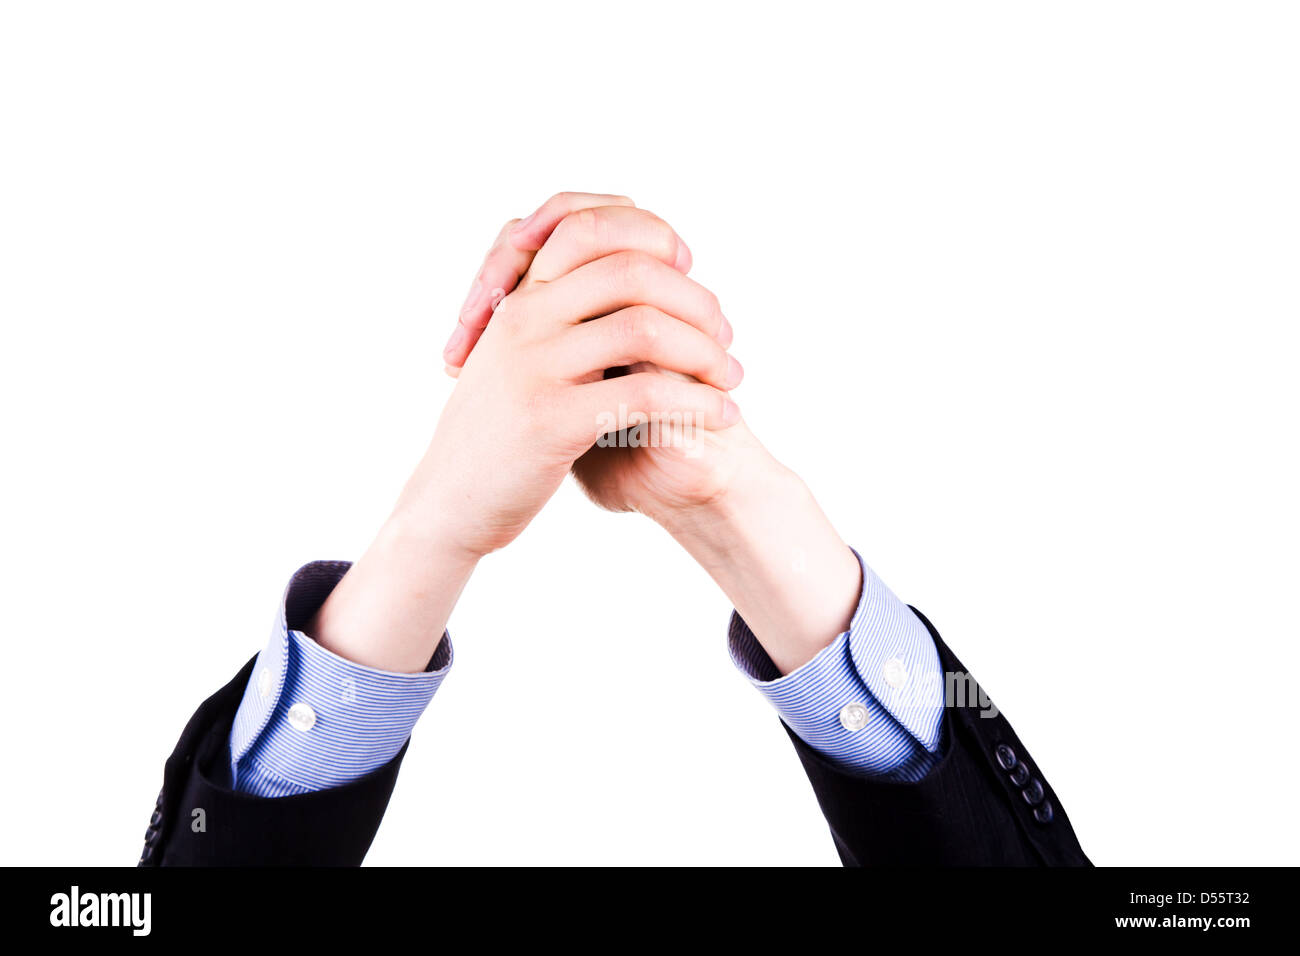 Male hands put together in achievment sign isolated on white. Success concept. Stock Photo